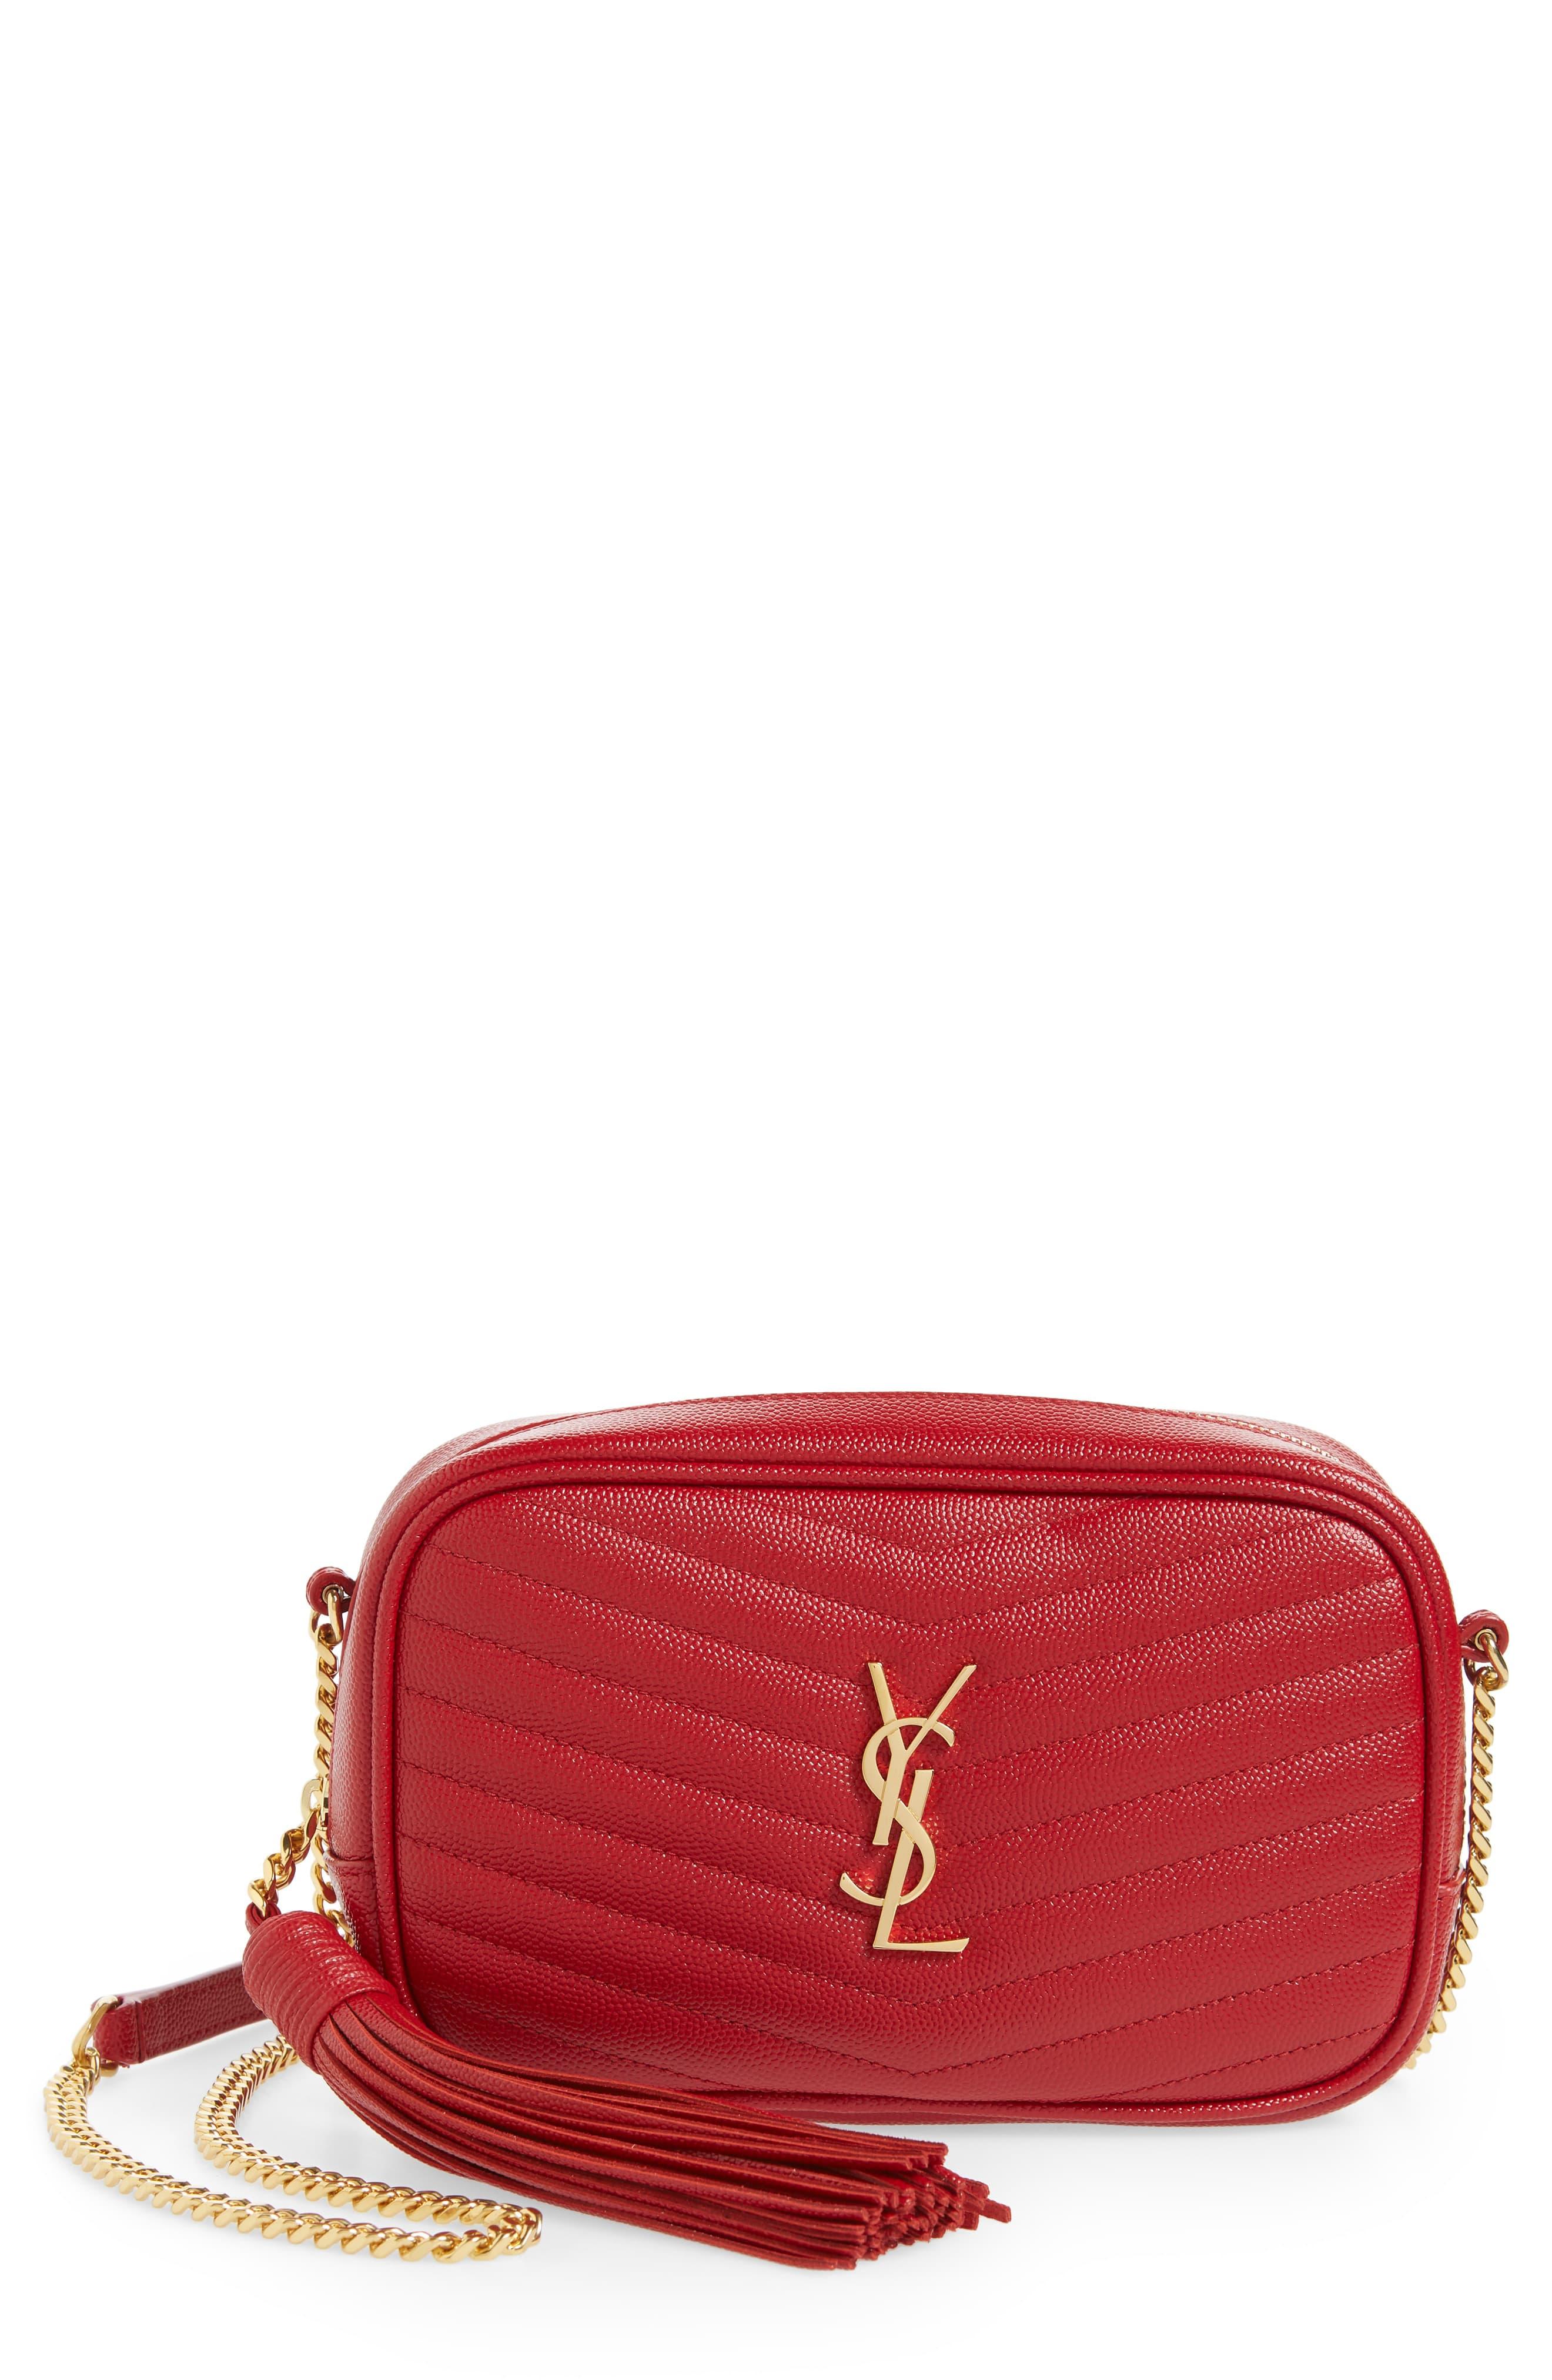 Saint Laurent Mini Lou Quilted Leather Crossbody Bag in Red - Lyst